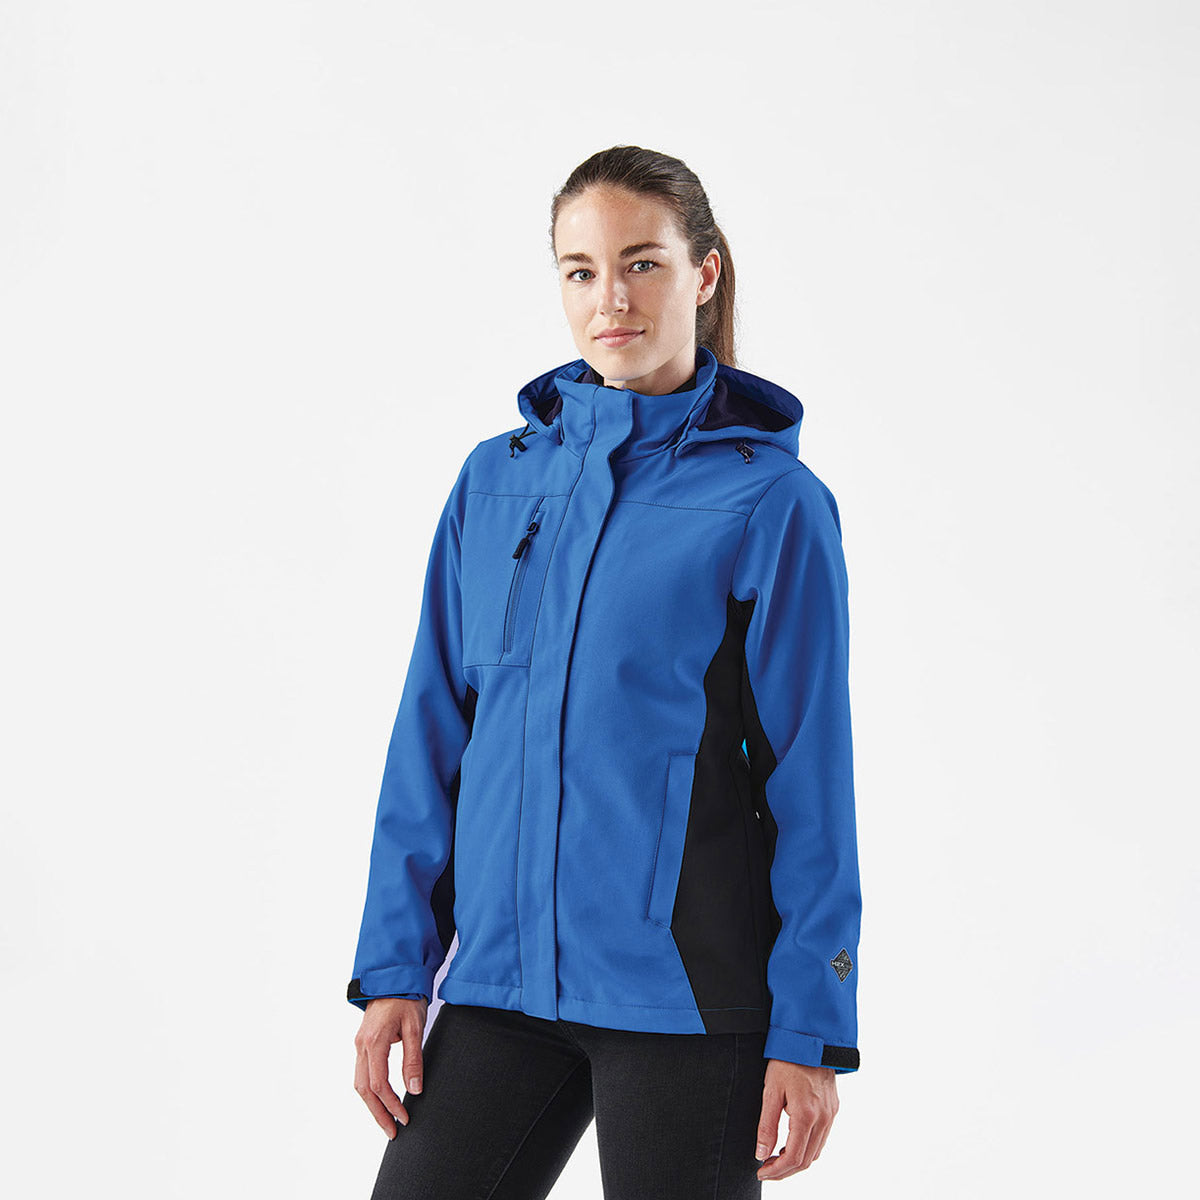 Women's Atmosphere System Jacket - Stormtech Canada Retail